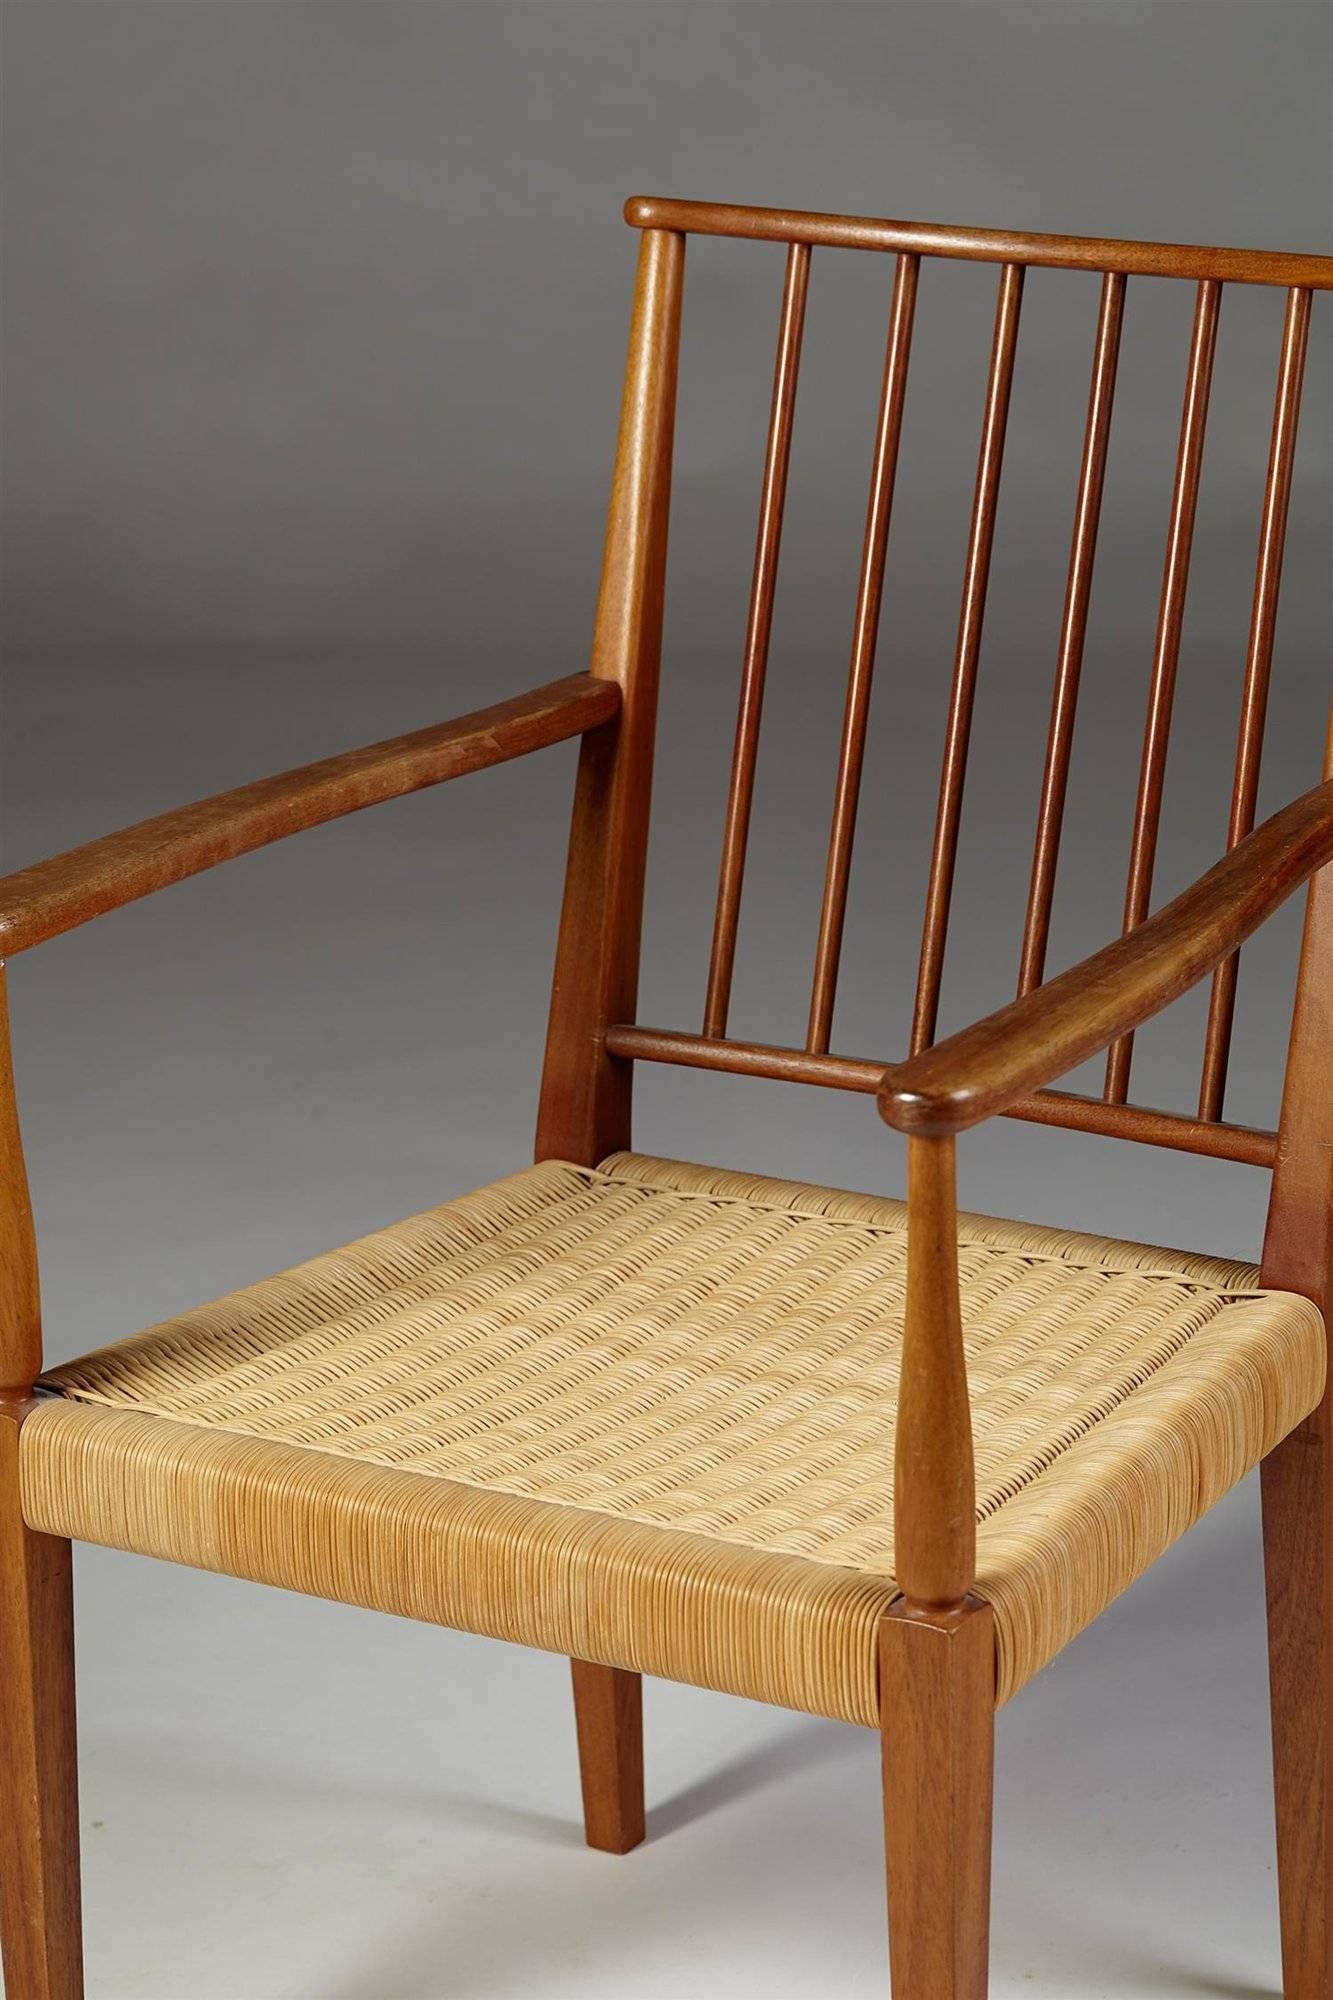 Armchair designed by Josef Frank for Svensk Tenn, Sweden, 1950s.

Mahogany and cane.